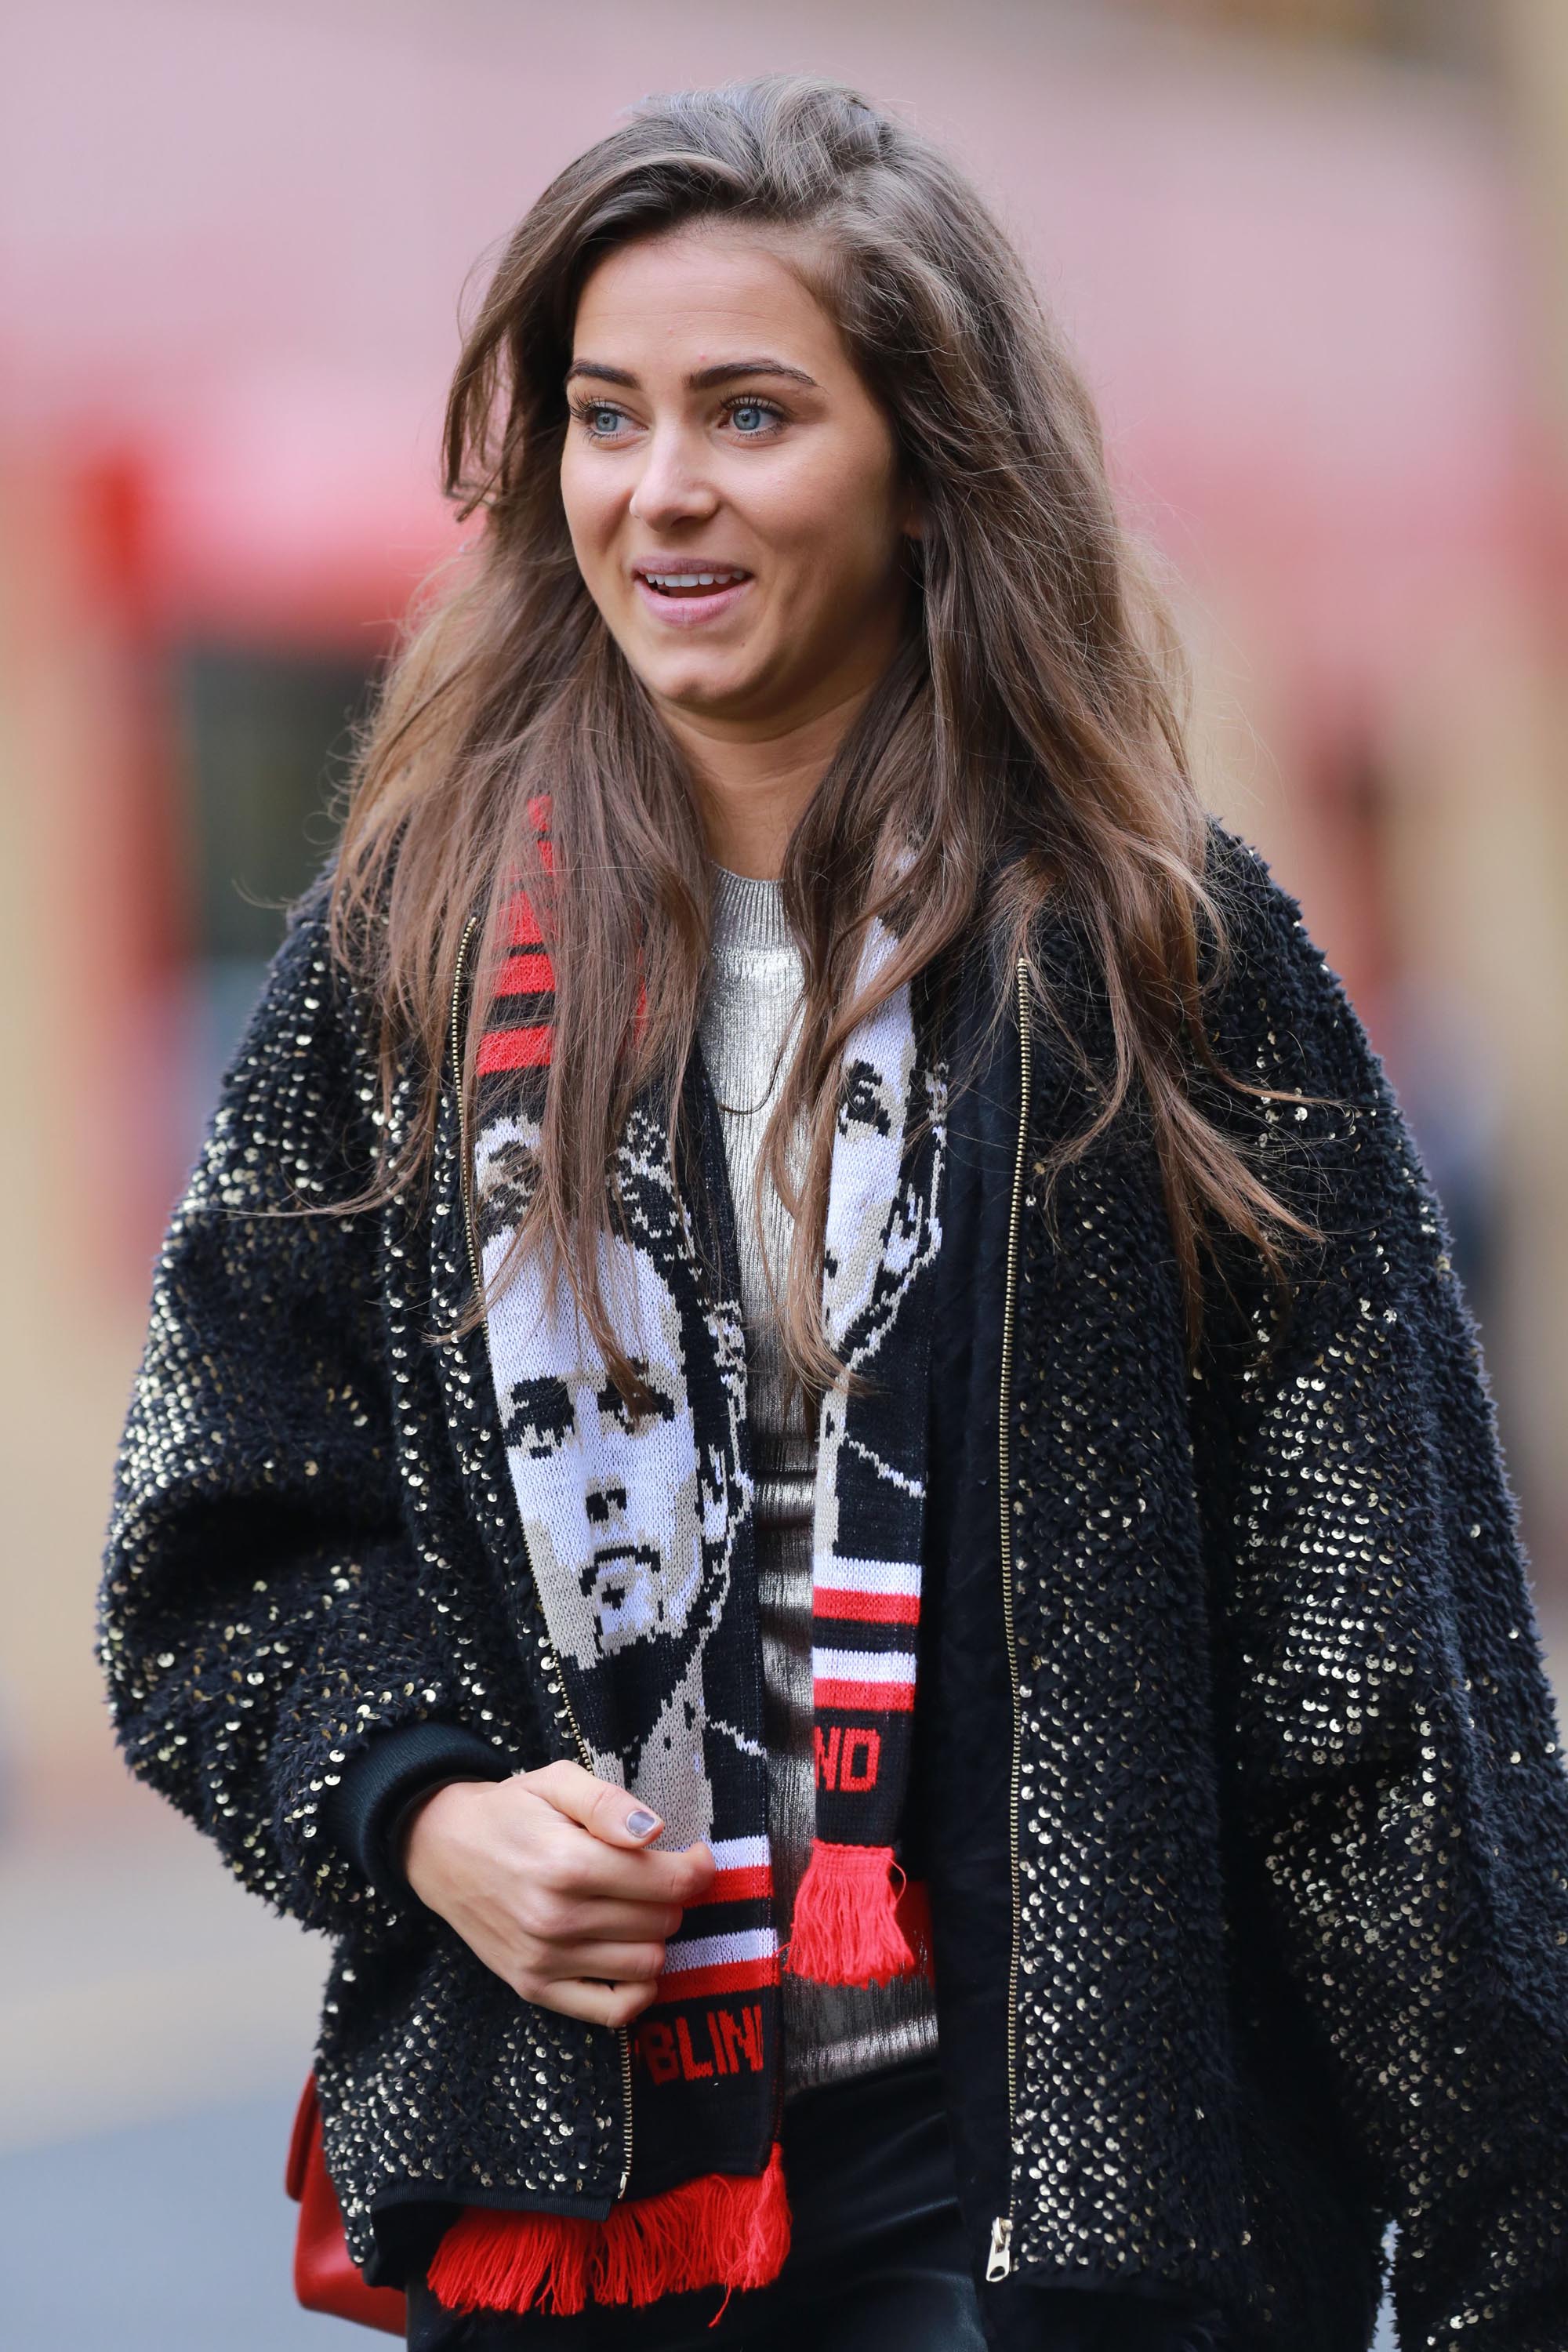 Candy Rae Fleur arriving at Old Trafford